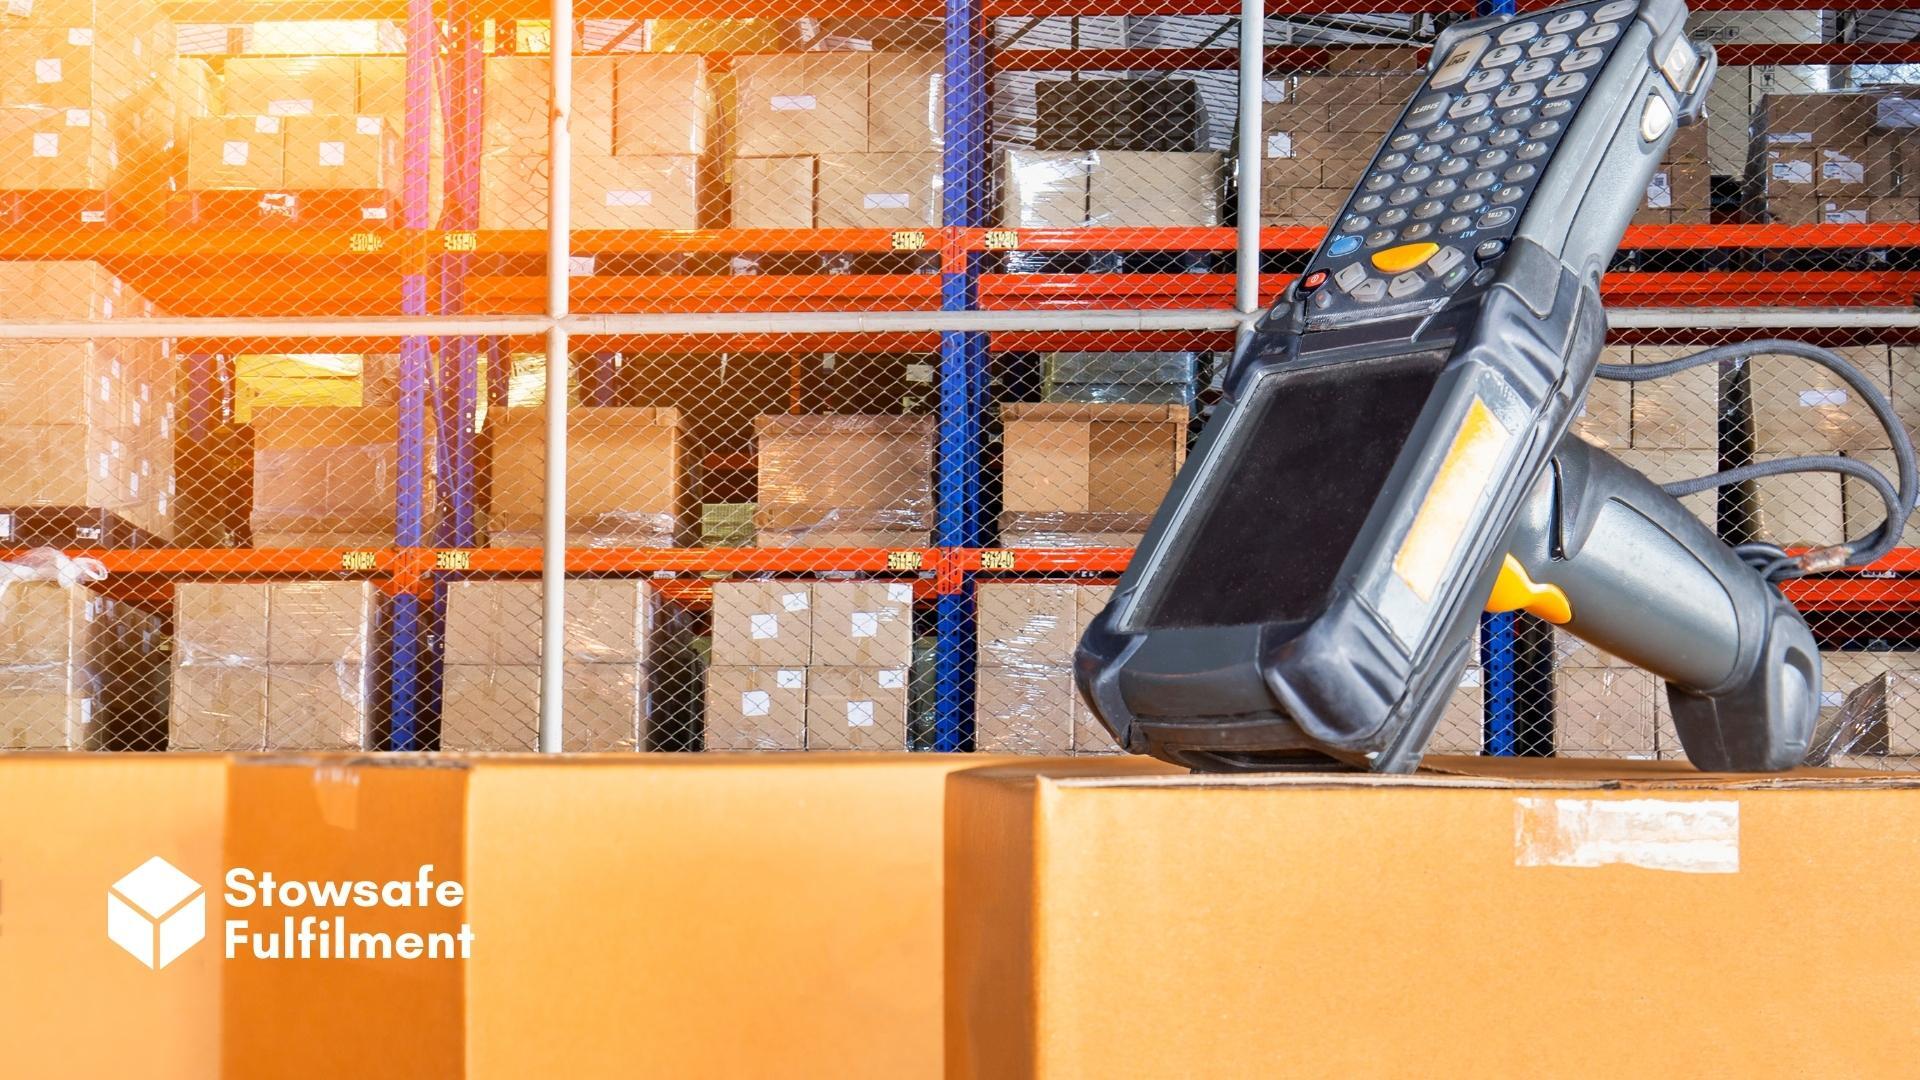 Is your eCommerce store starting to grow? Time to turn your mind to inventory management. Read on to find out more – and learn how a 3PL can help.